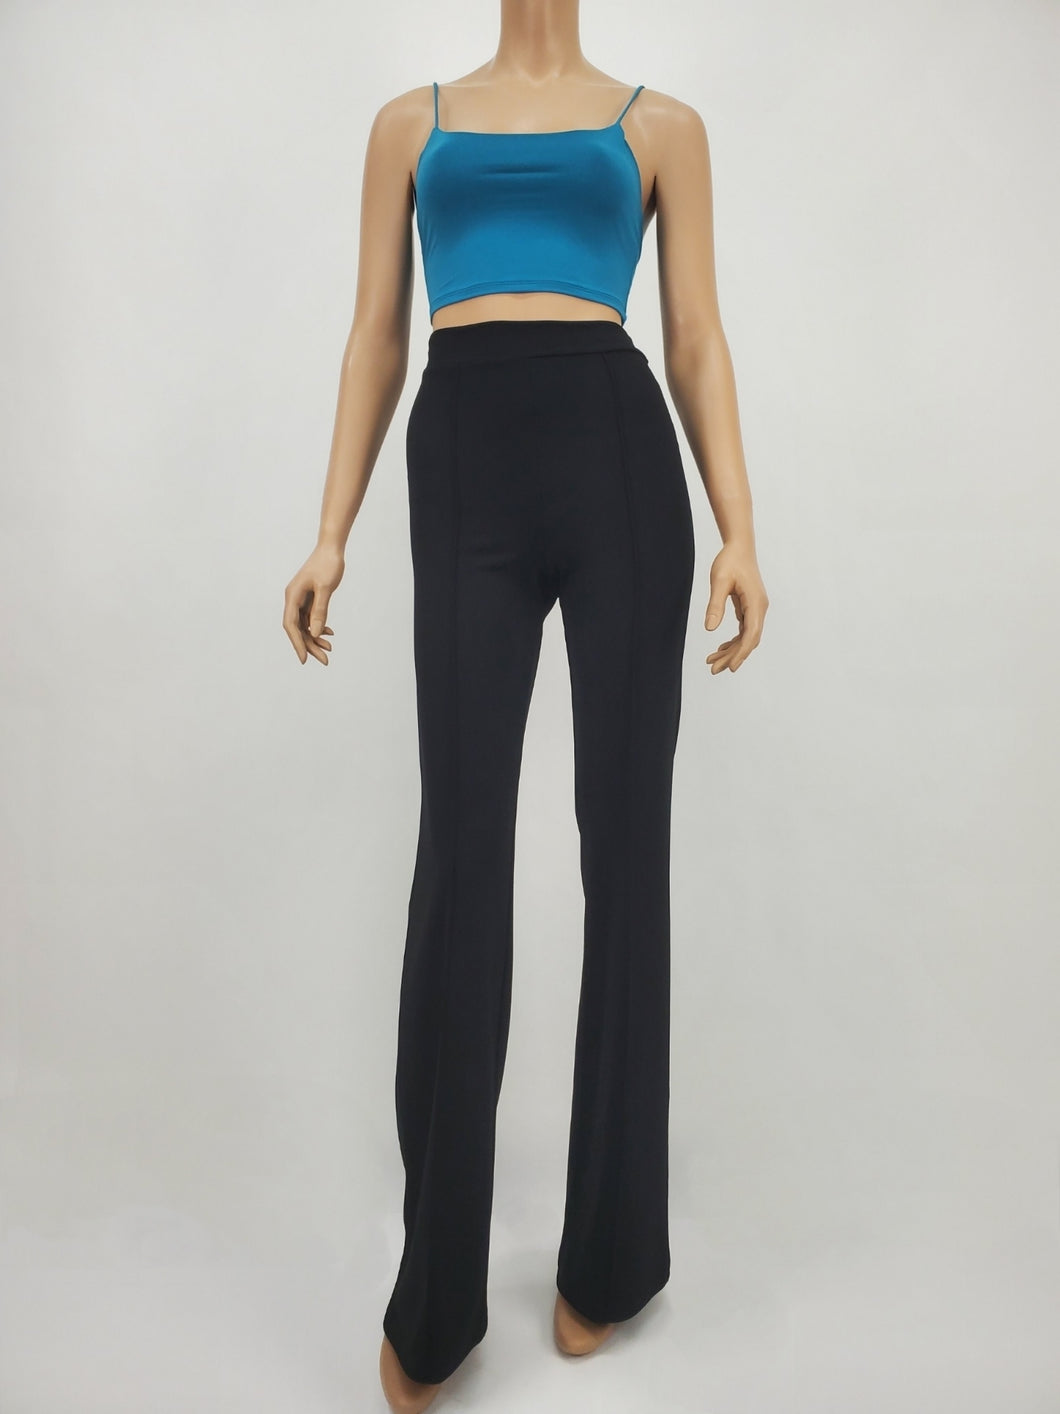 Double Layer Spaghetti Strap Crop Top (Teal)